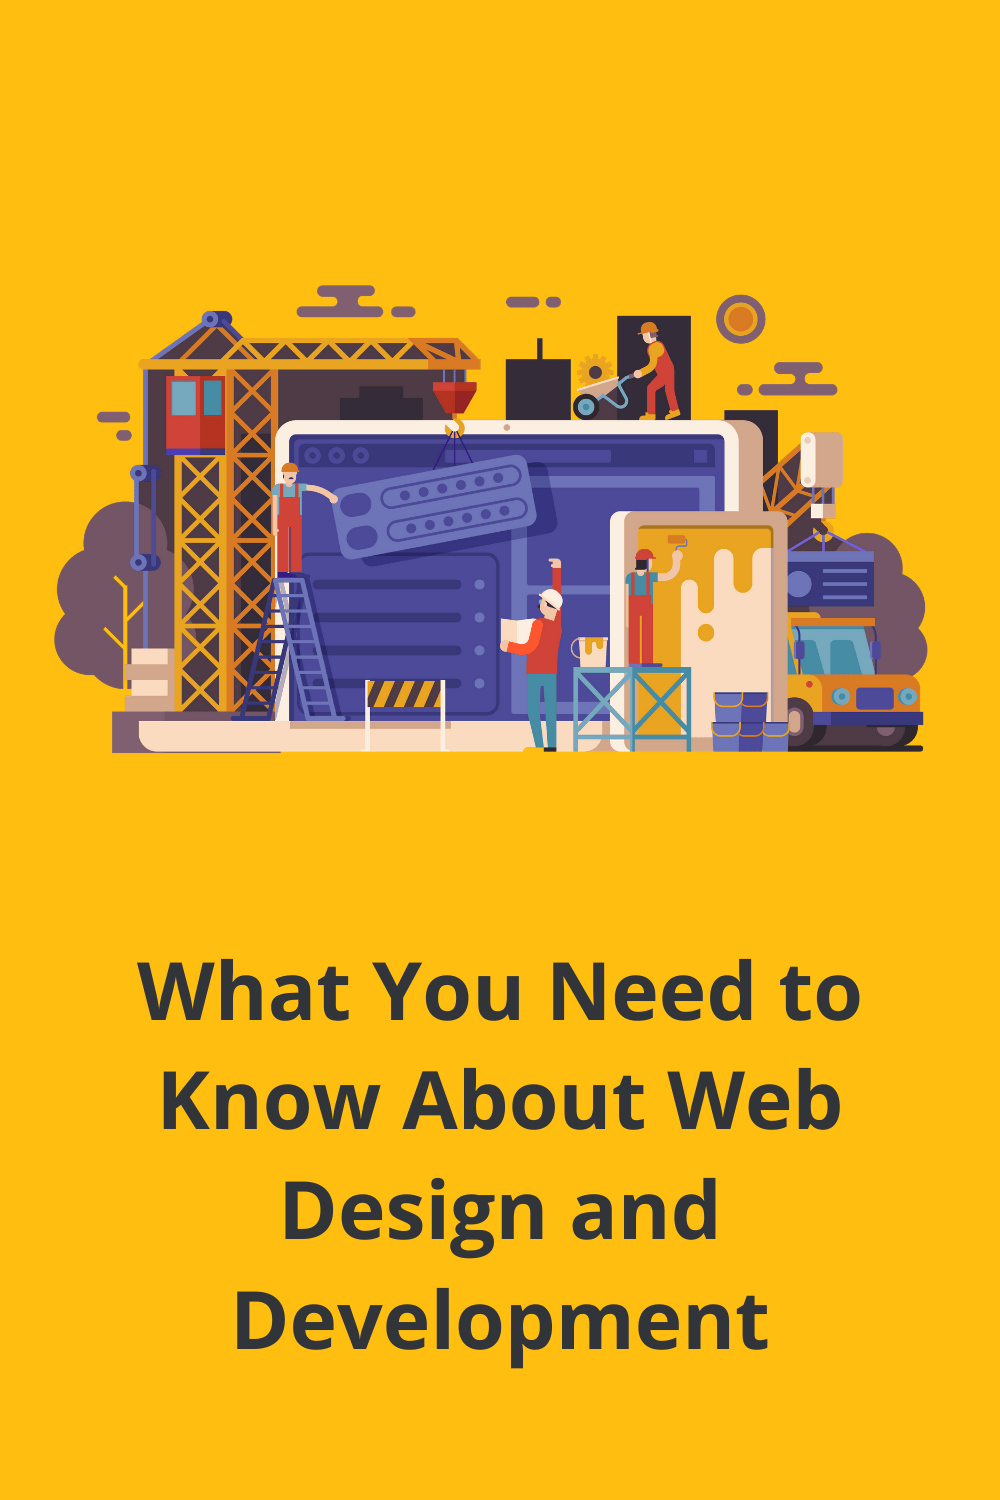 Want to rank up the ladder and get leads for your website? Find out how great web design and development can make a striking difference. via @scopedesign